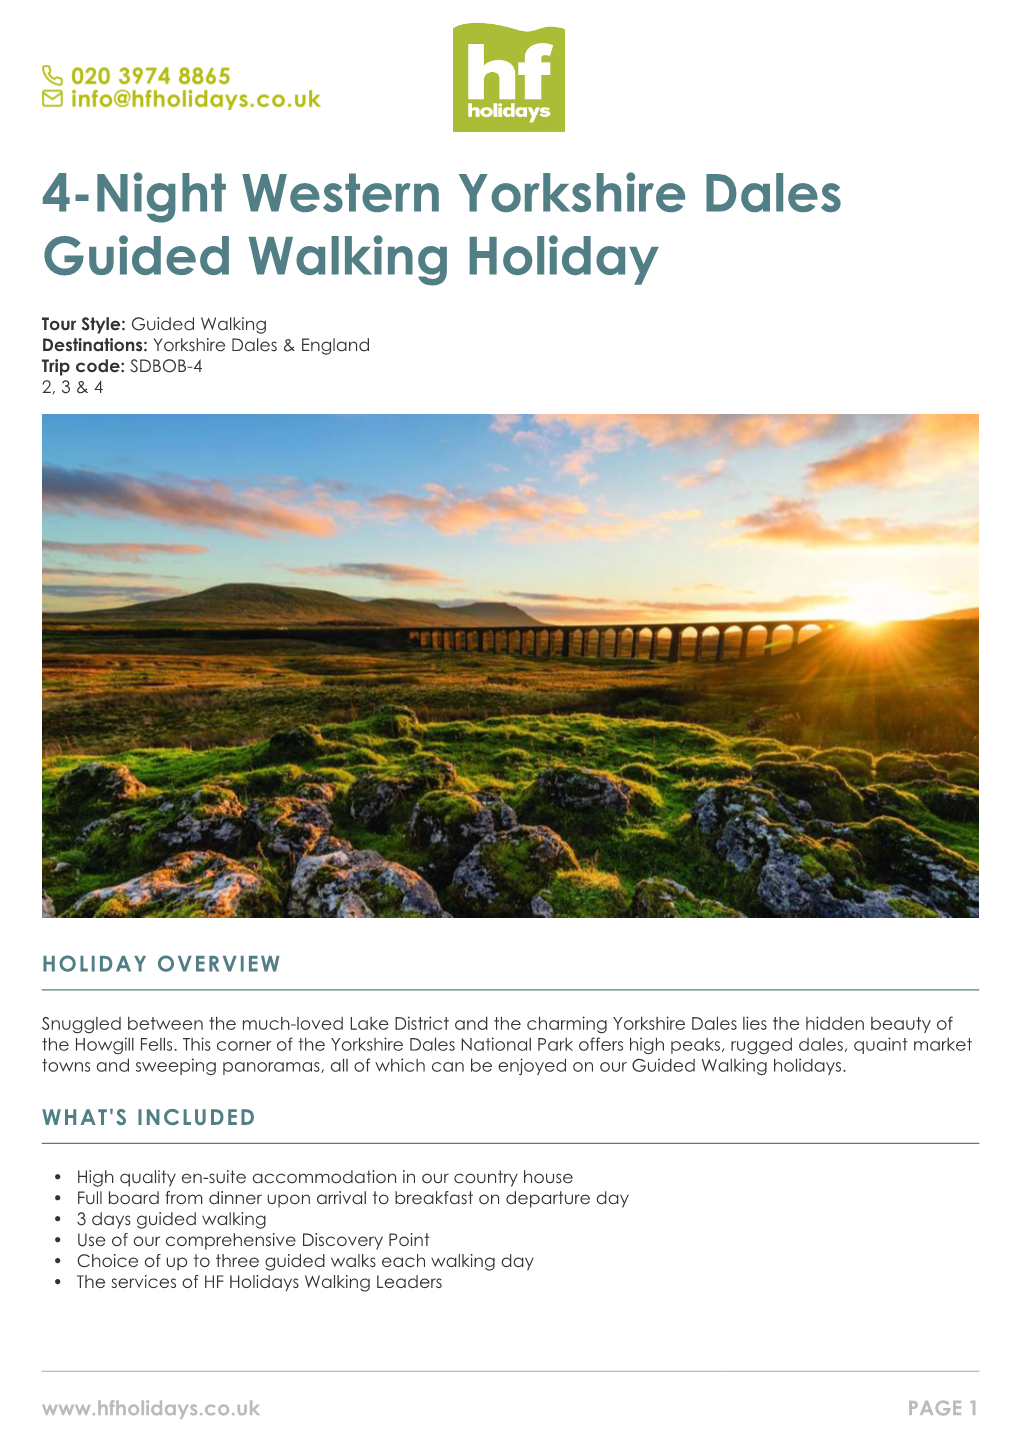 4-Night Western Yorkshire Dales Guided Walking Holiday